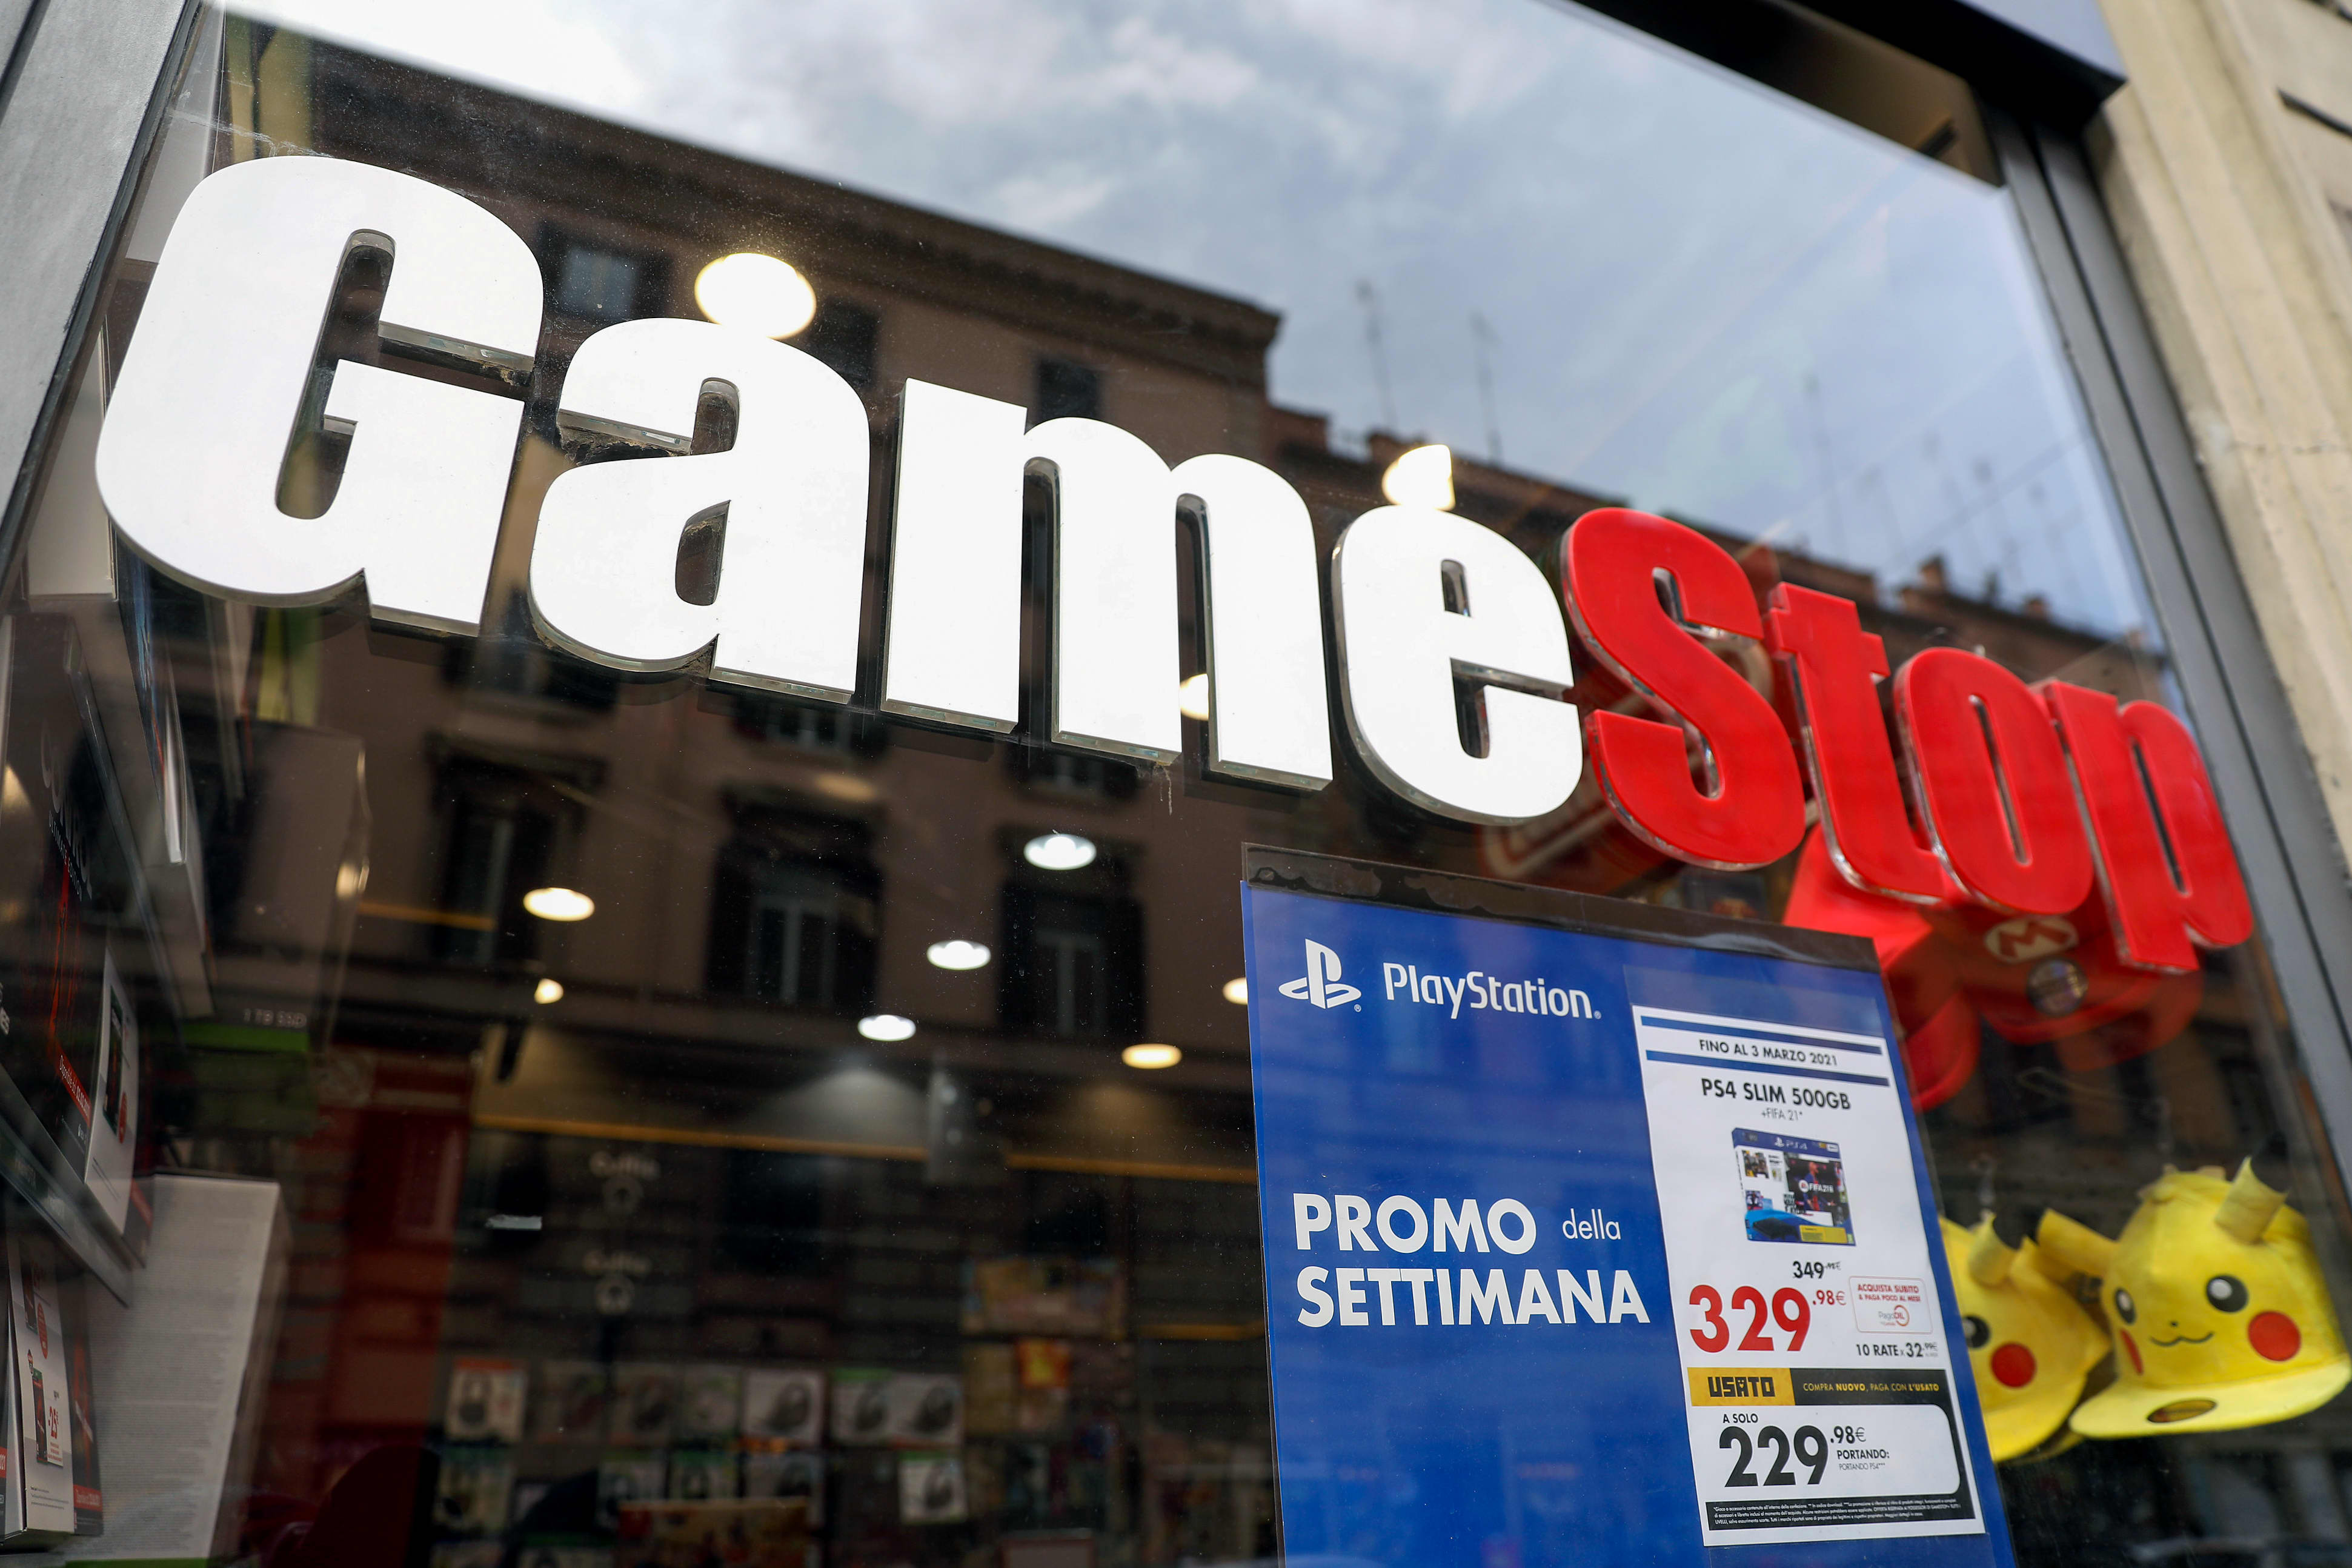 Melvin Capital lost more than 50% after betting on GameStop: WSJ